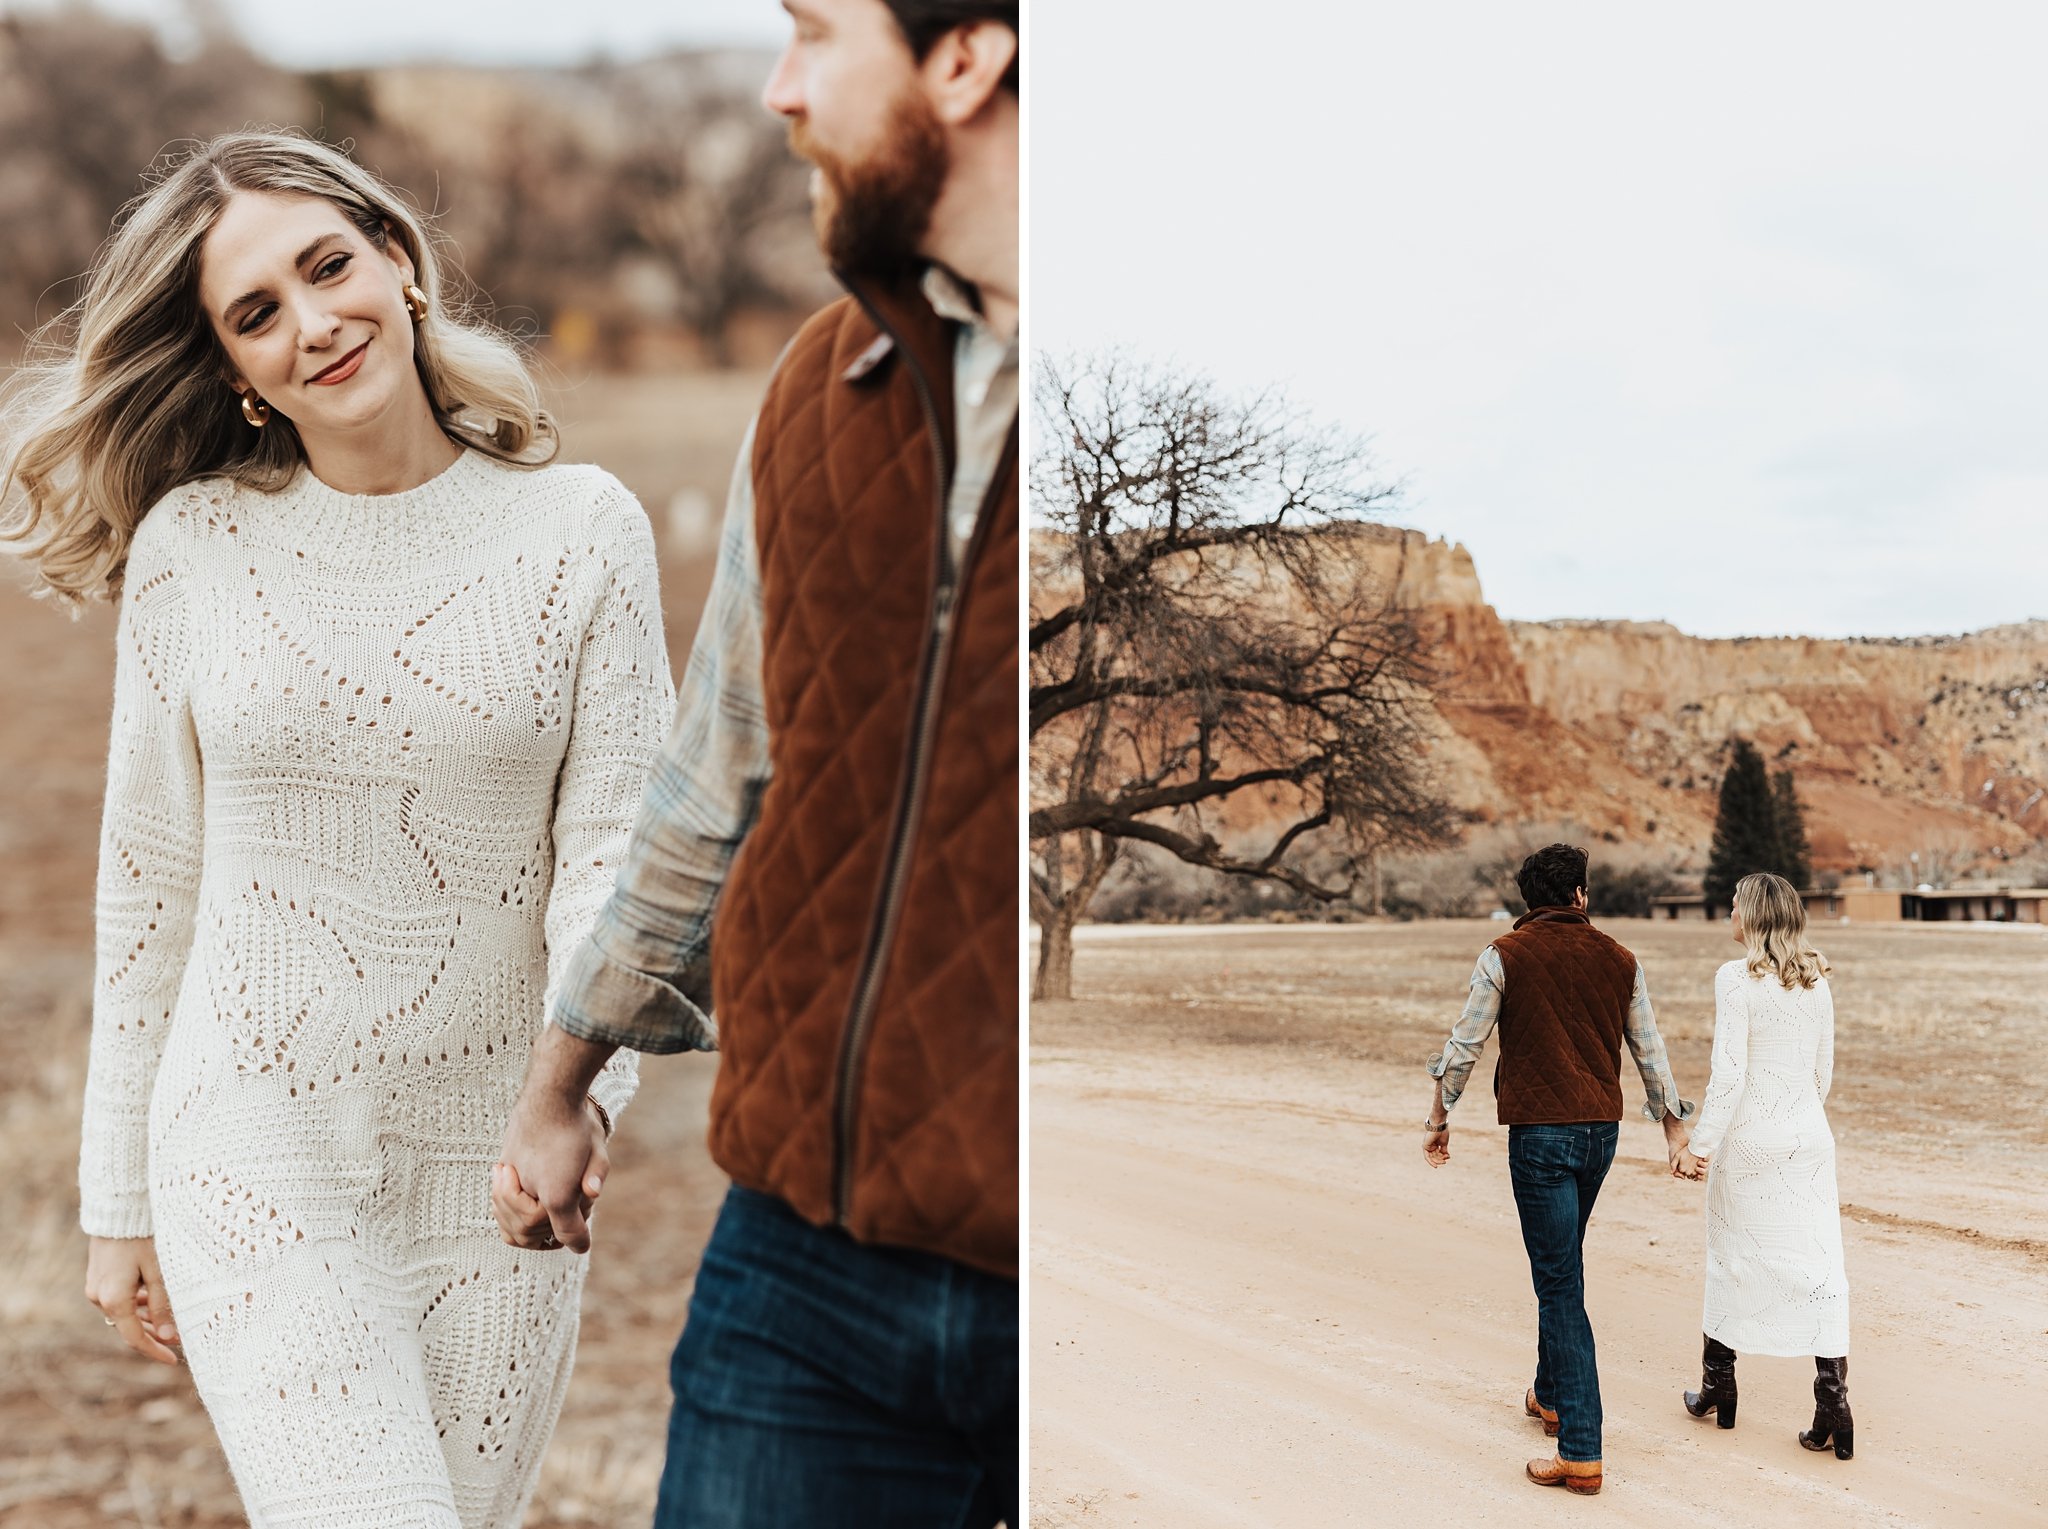 Alicia+lucia+photography+-+albuquerque+wedding+photographer+-+santa+fe+wedding+photography+-+new+mexico+wedding+photographer+-+new+mexico+wedding+-+southwest+engagement+-+ghost+ranch+engagement+-+ghost+ranch+wedding_0026.jpg